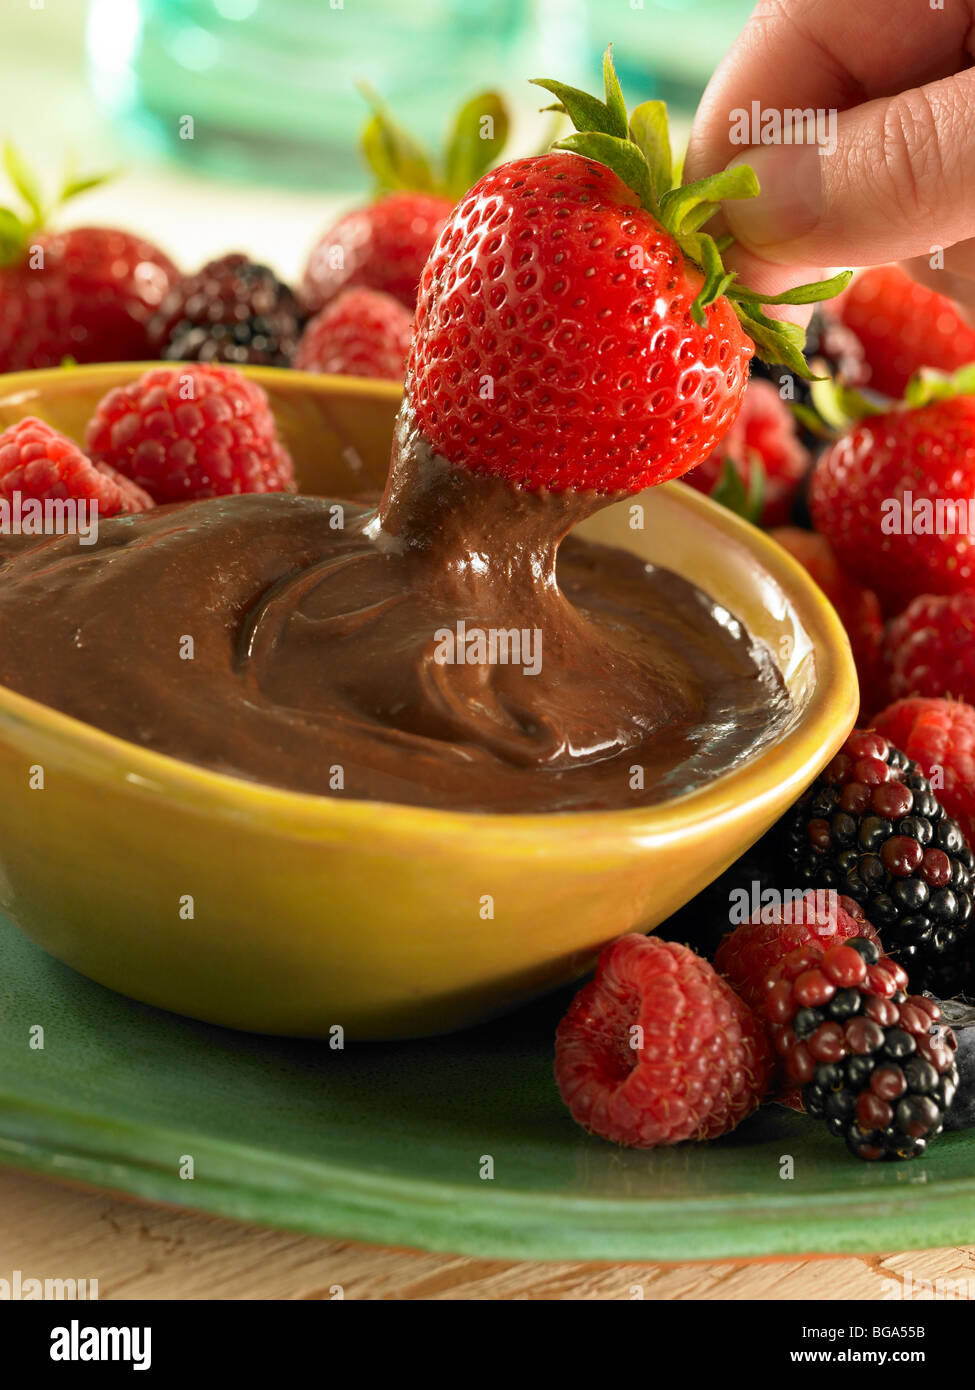 Strawberry dipping in chocolate sauce Stock Photo